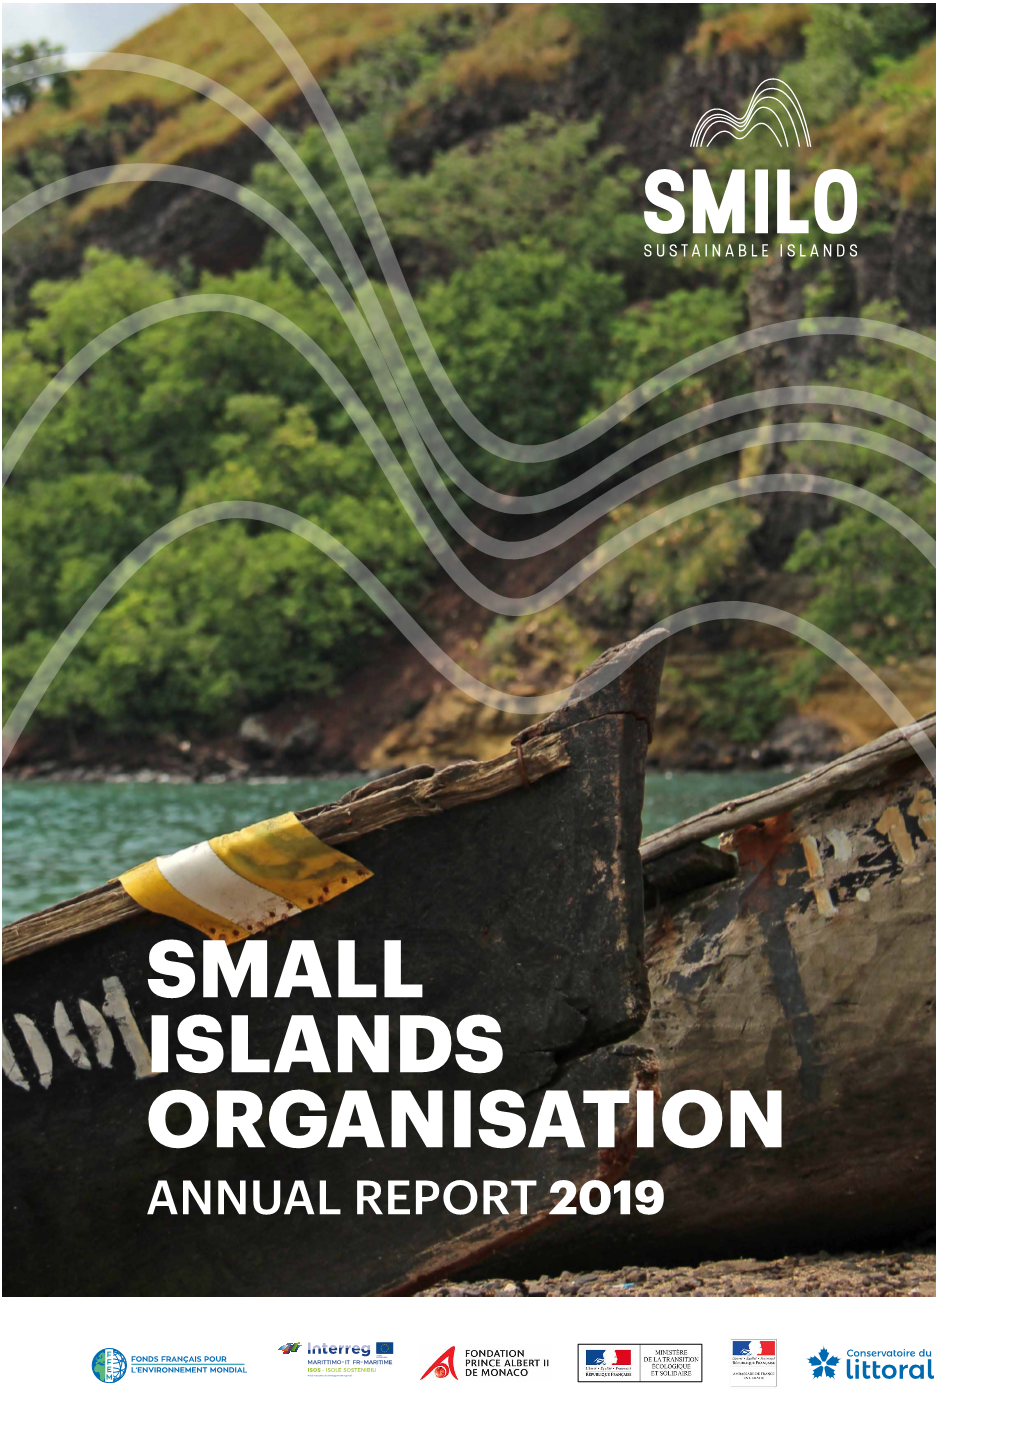 Small Islands Organisation Annual Report 2019